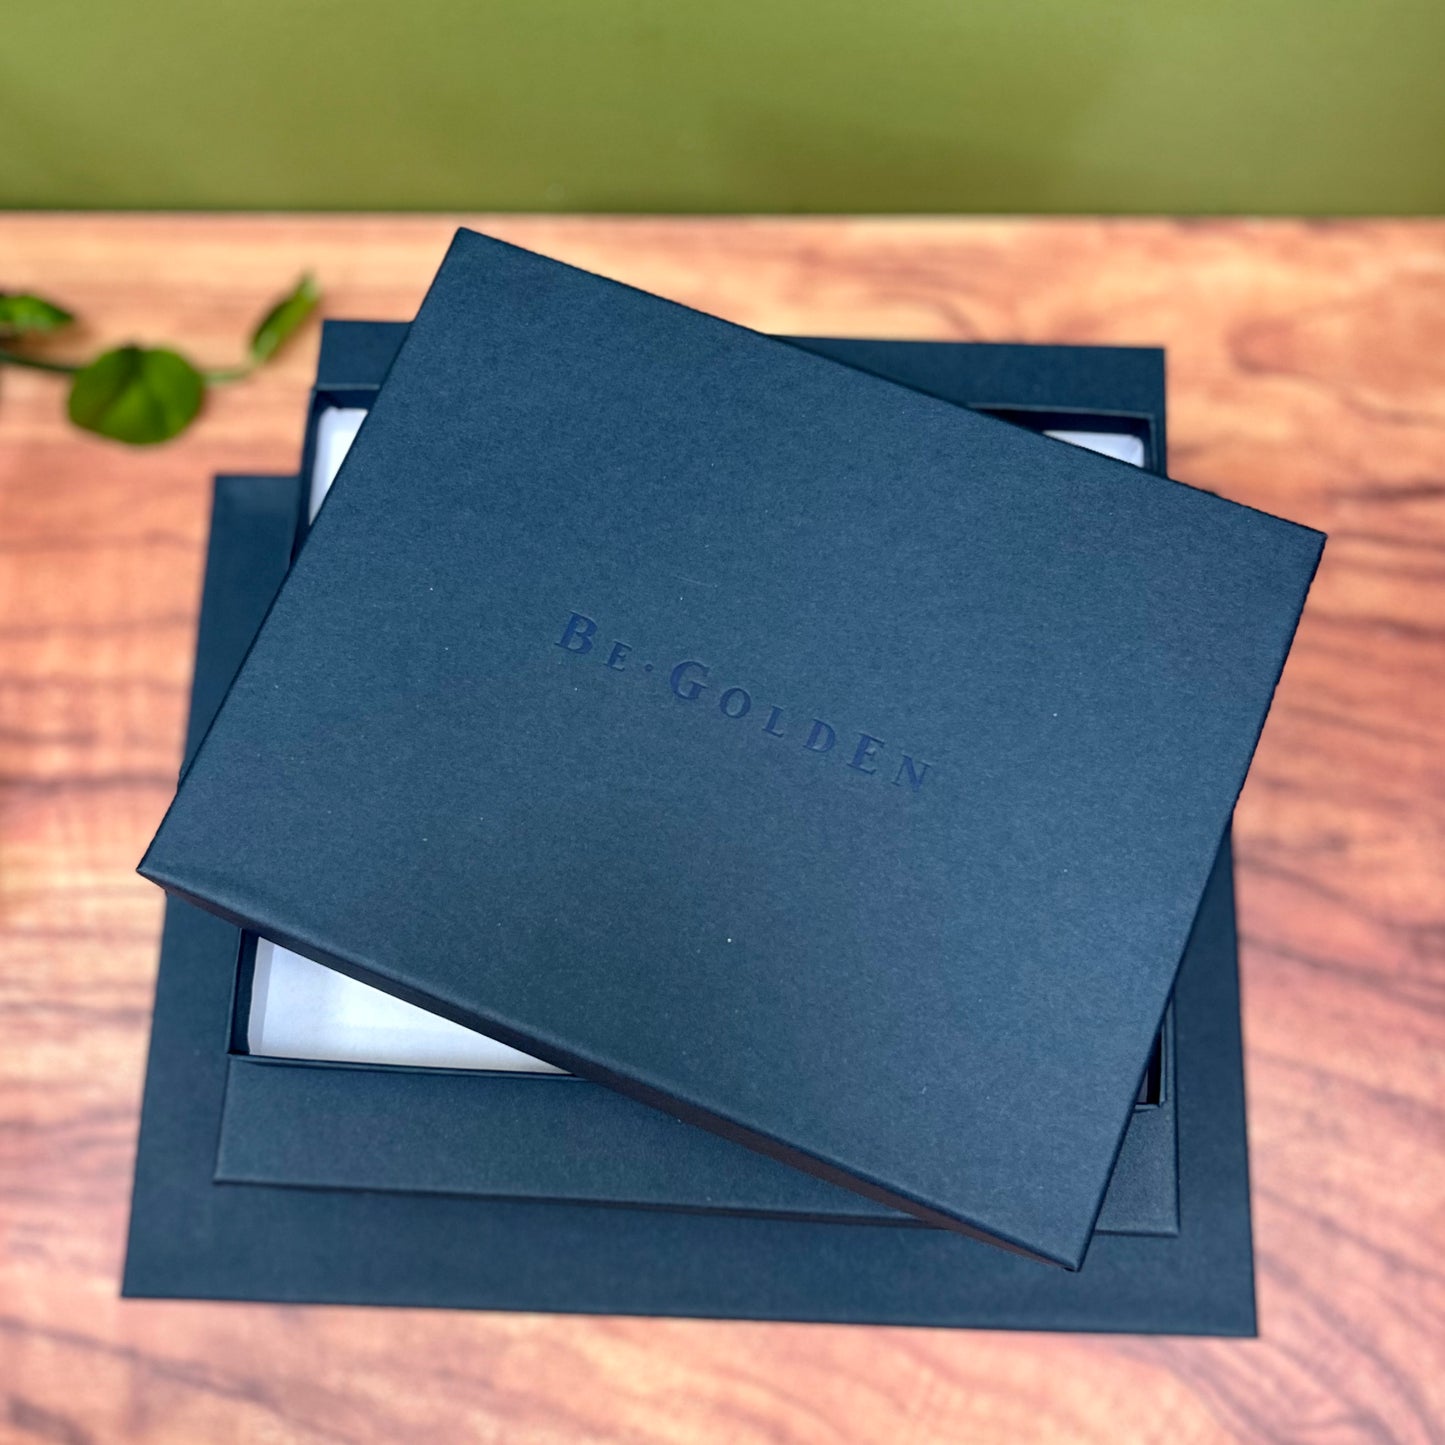 a pile of blue presentation boxes are stacked up on a wooden table. The presentation boxes are embossed with the brand name begolden